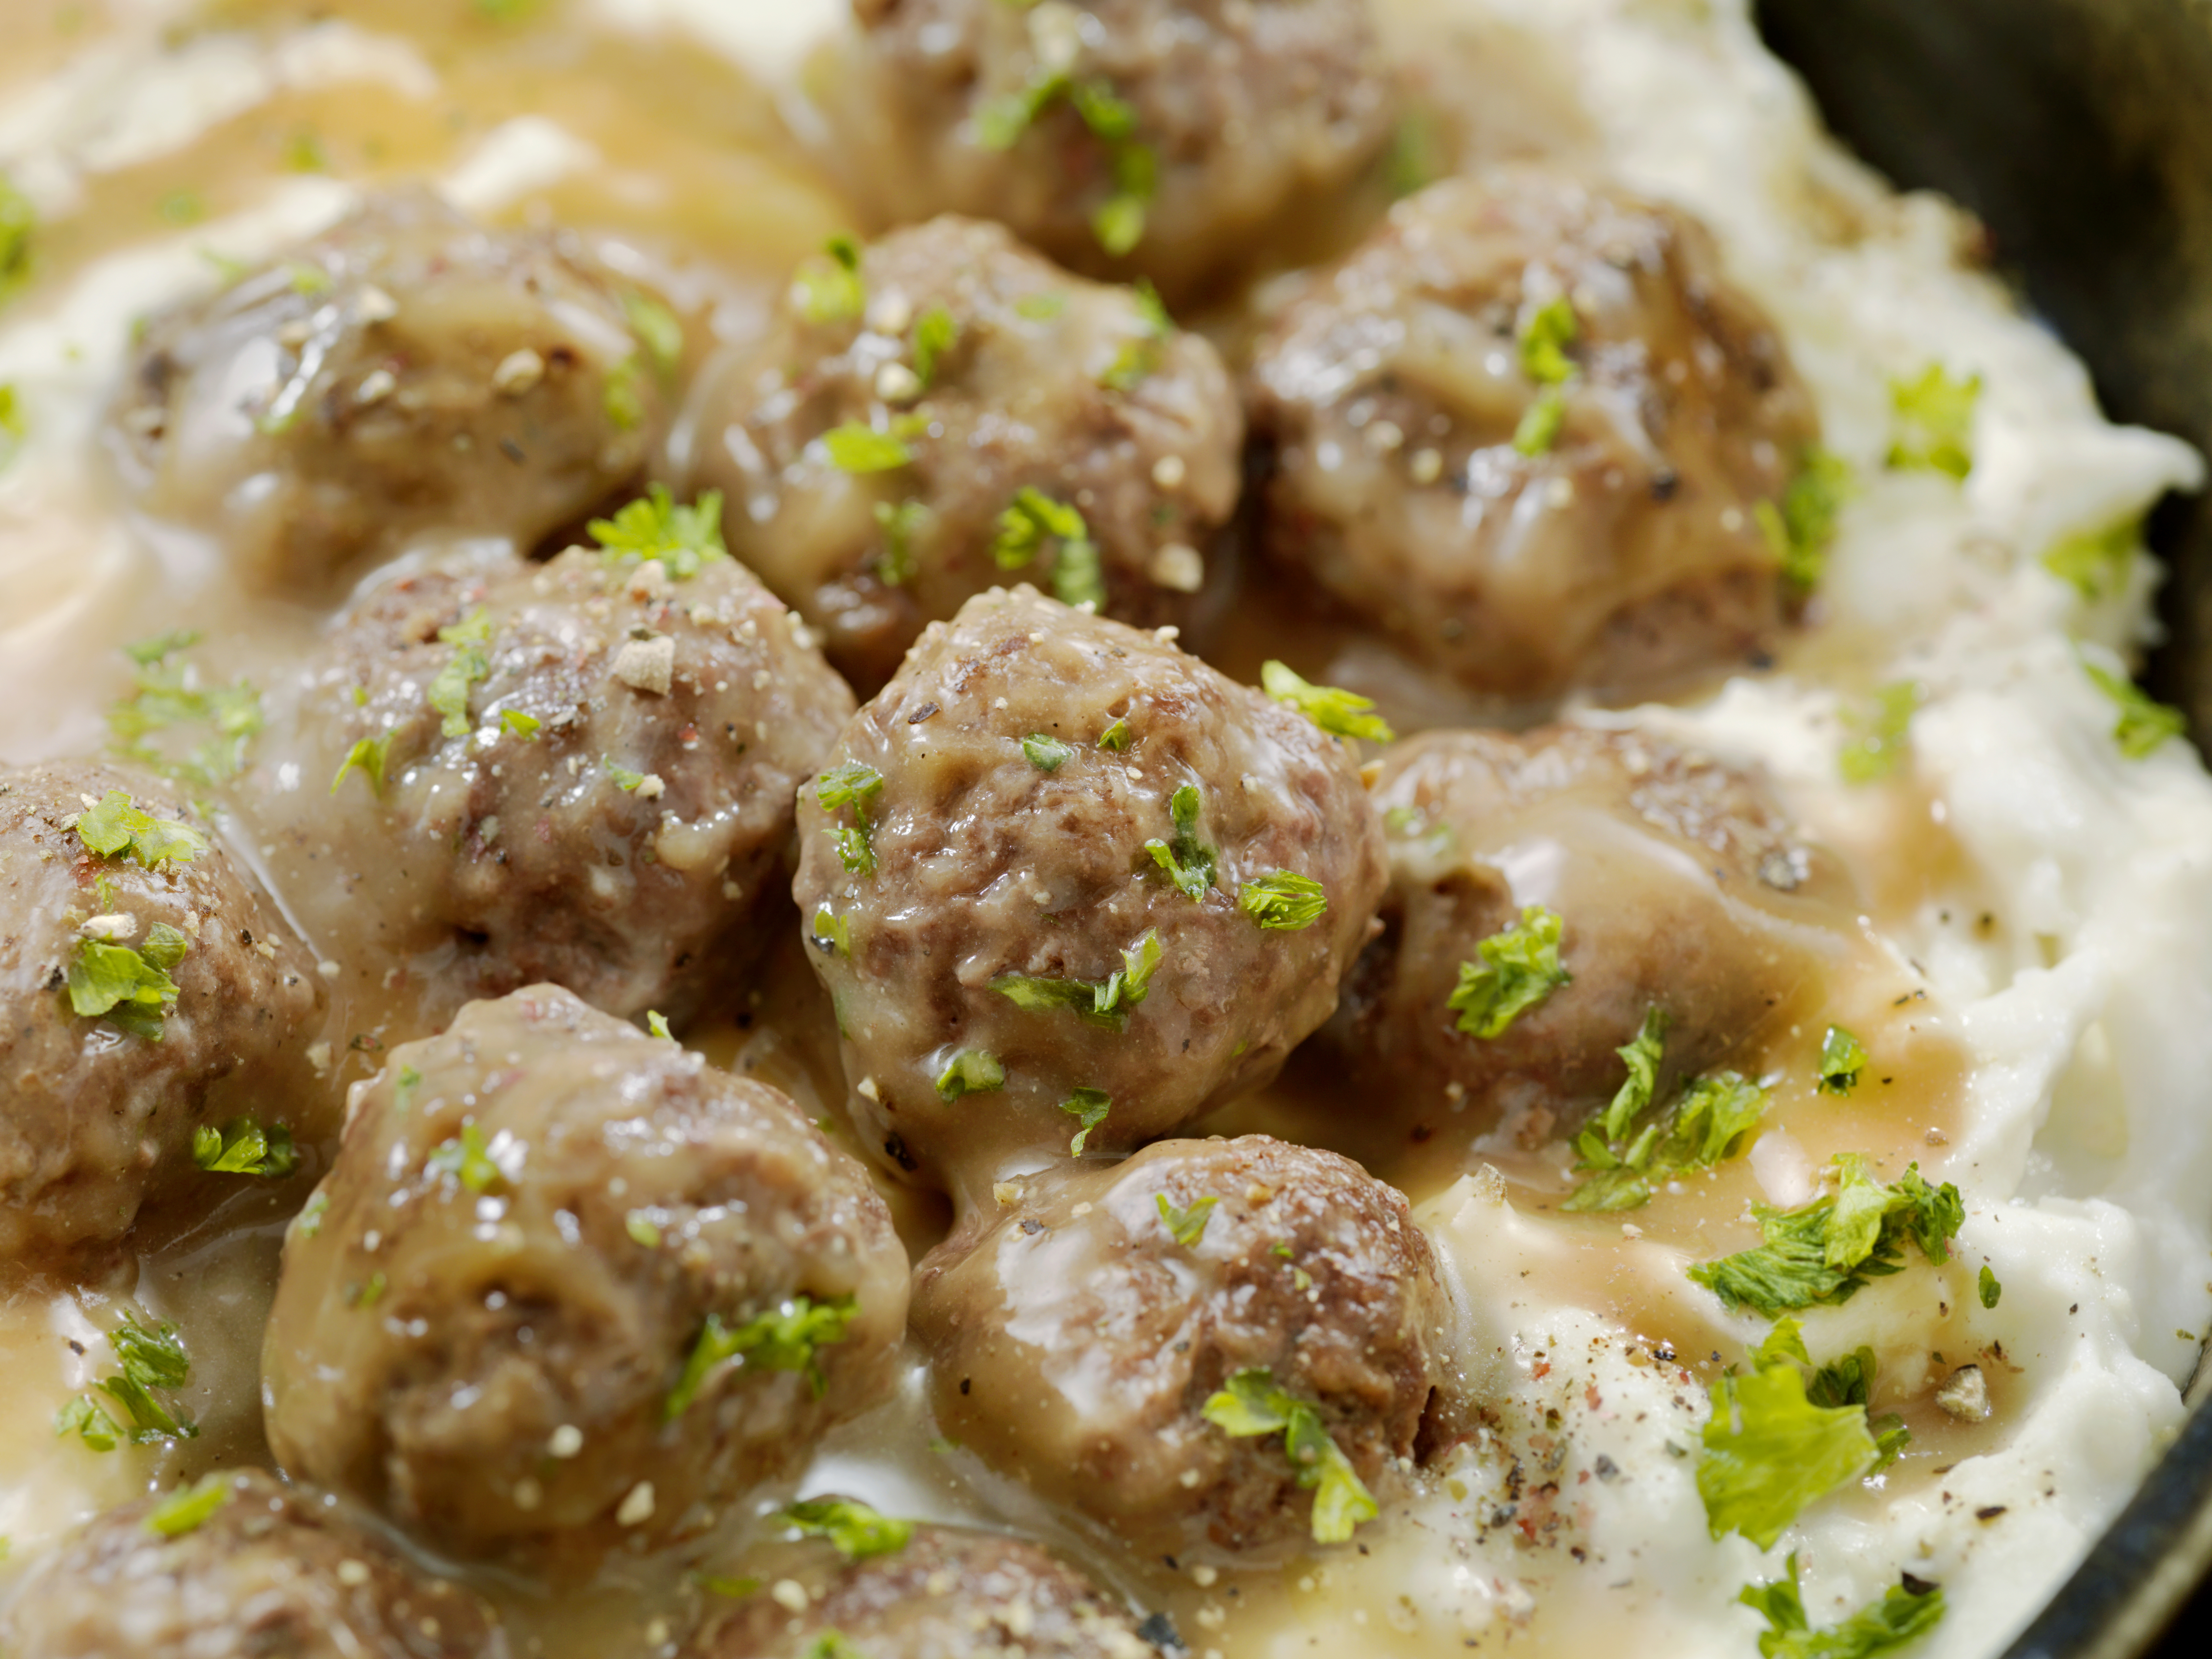 Swedish meatballs with mashed potatoes | Source: Getty Images